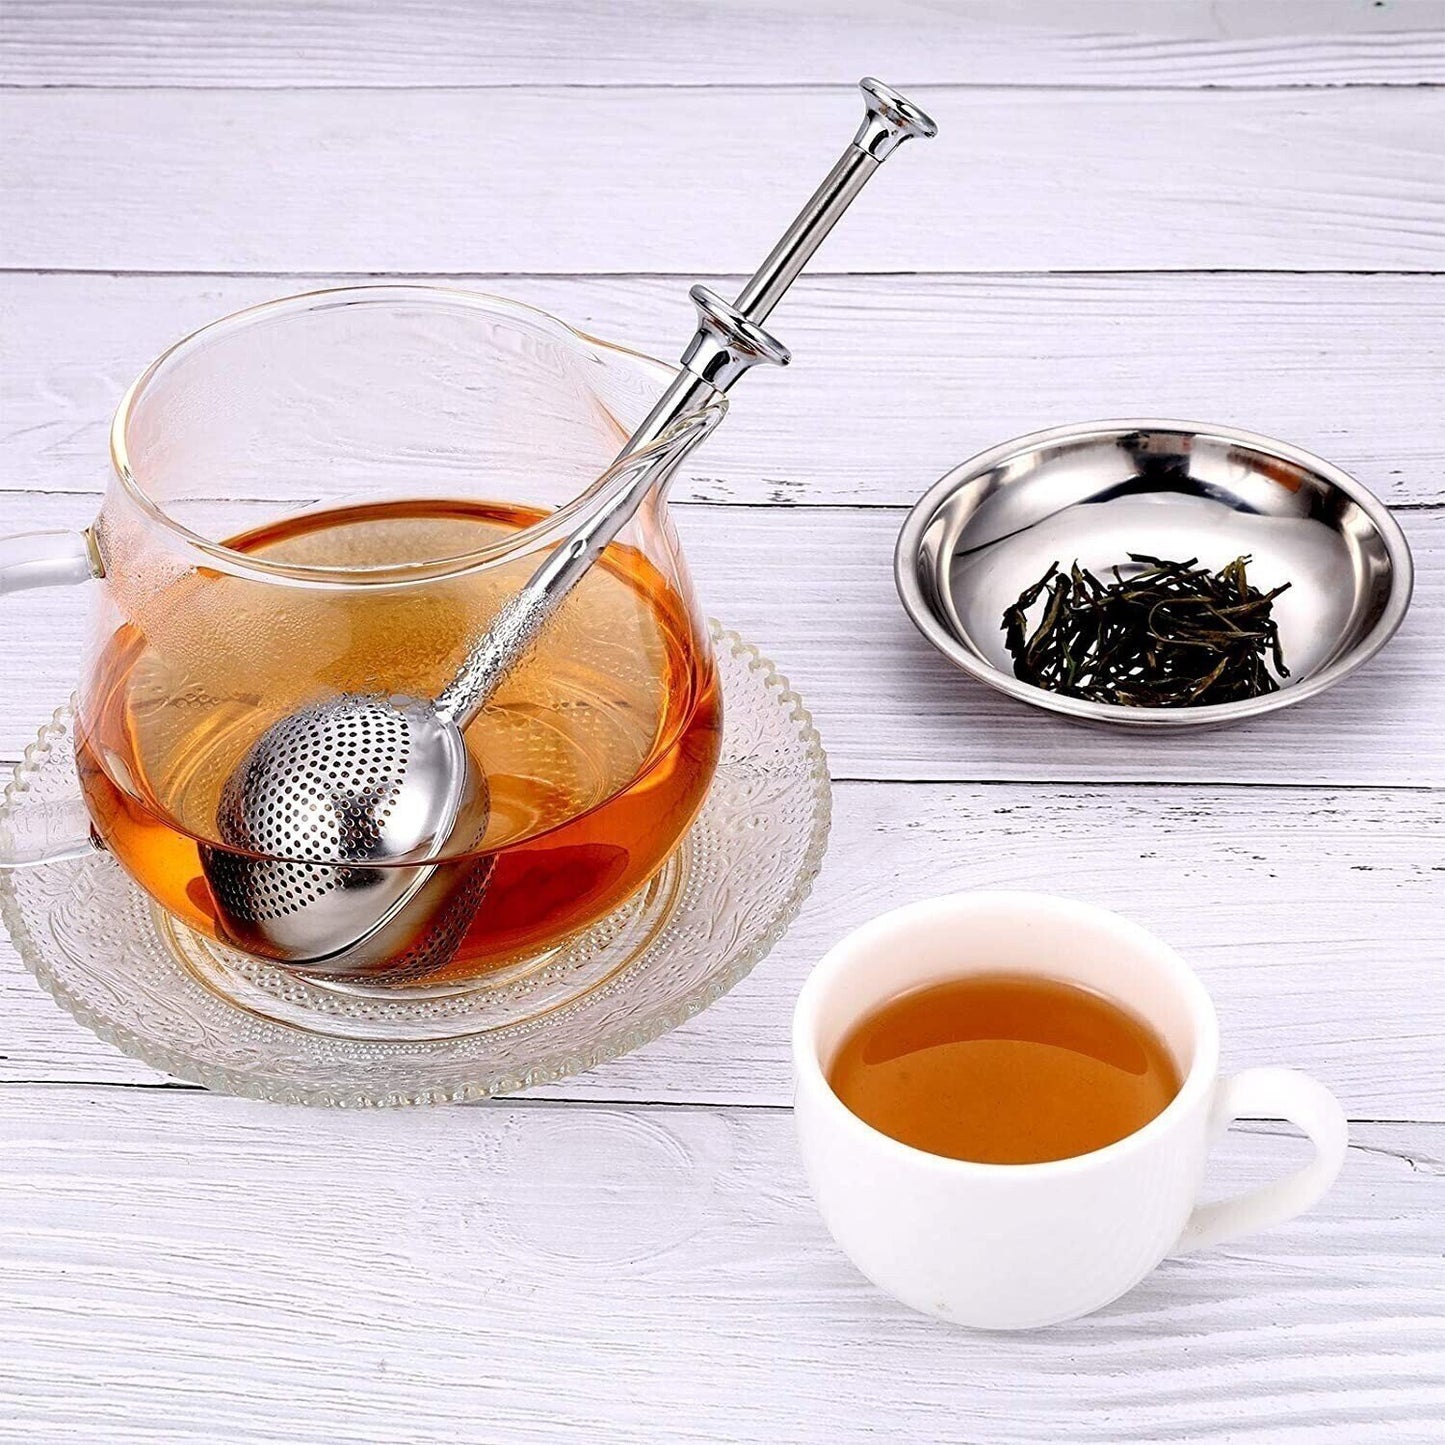 🔥(New Year Hot Sale - Save 40% OFF) Long-Handle Tea Ball Infuser-Buy 3 Get 2 Free & Free Shipping - $8.3 Each Only Today!